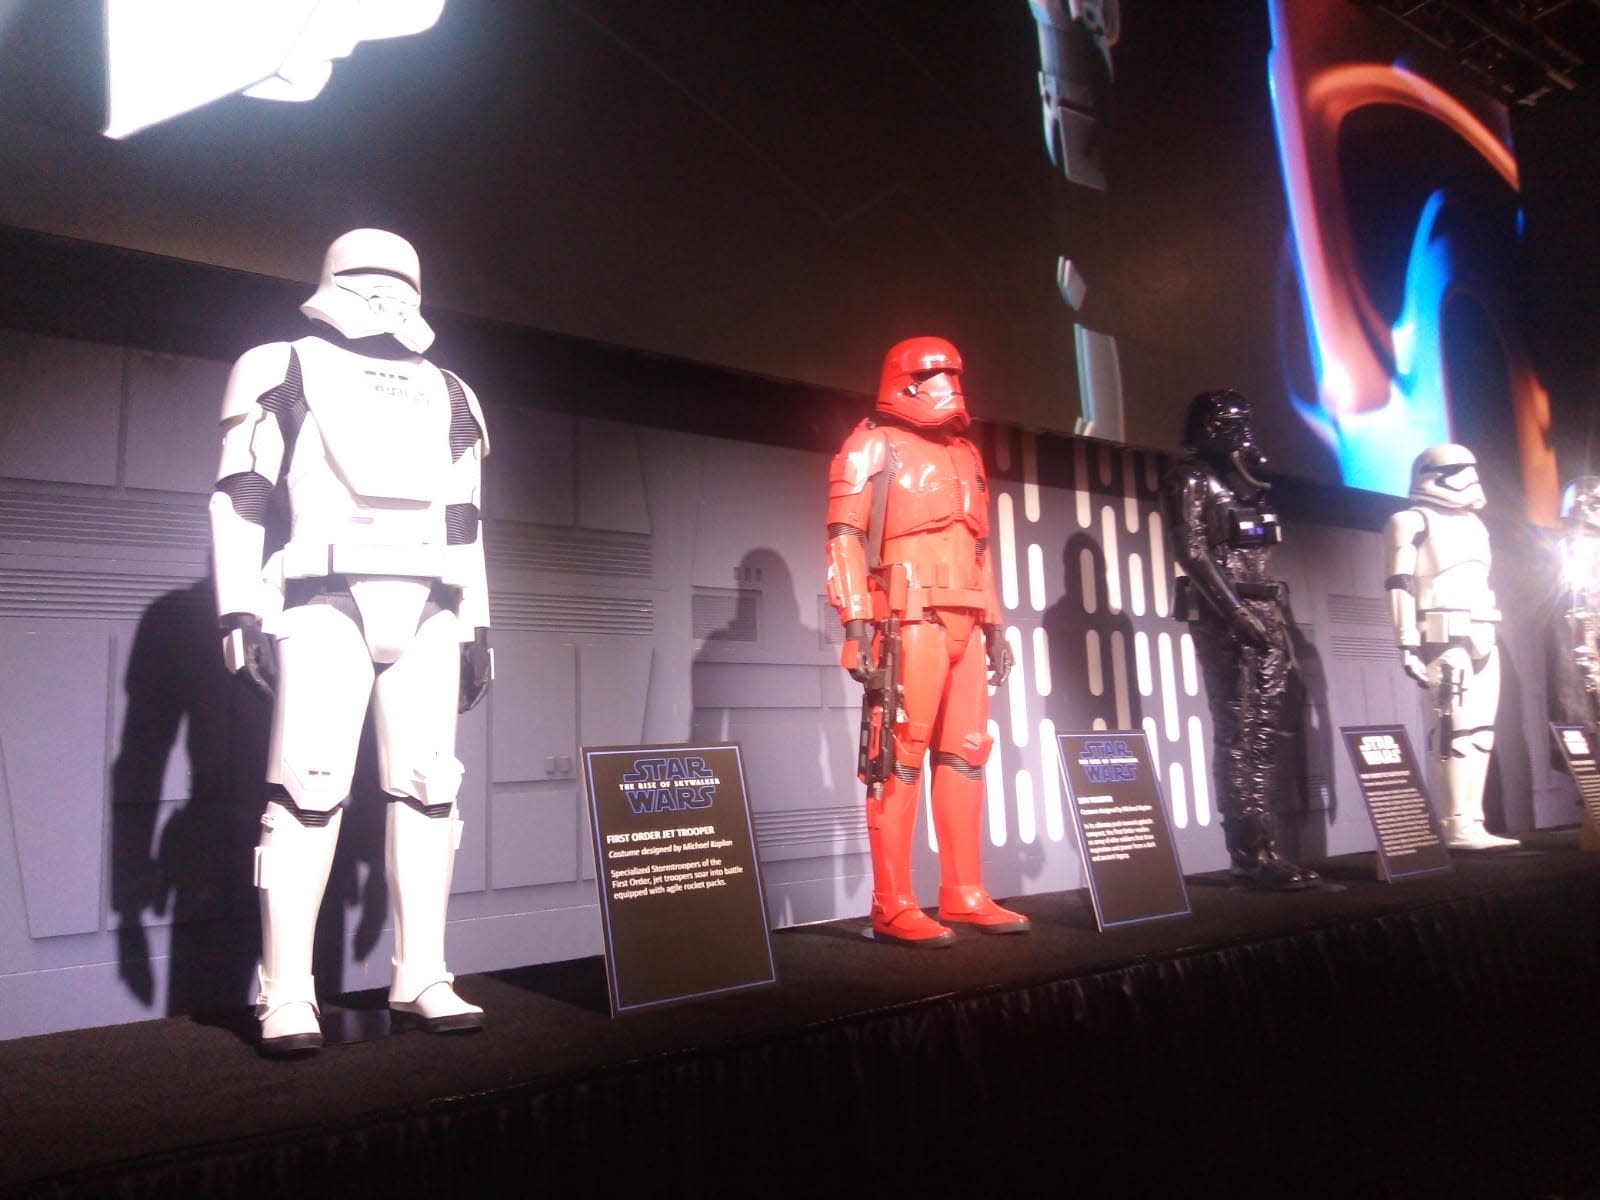 New 'Star Wars: Rise Of Skywalker’ Stormtroopers debut at D23 Expo - Yahoo Entertainment